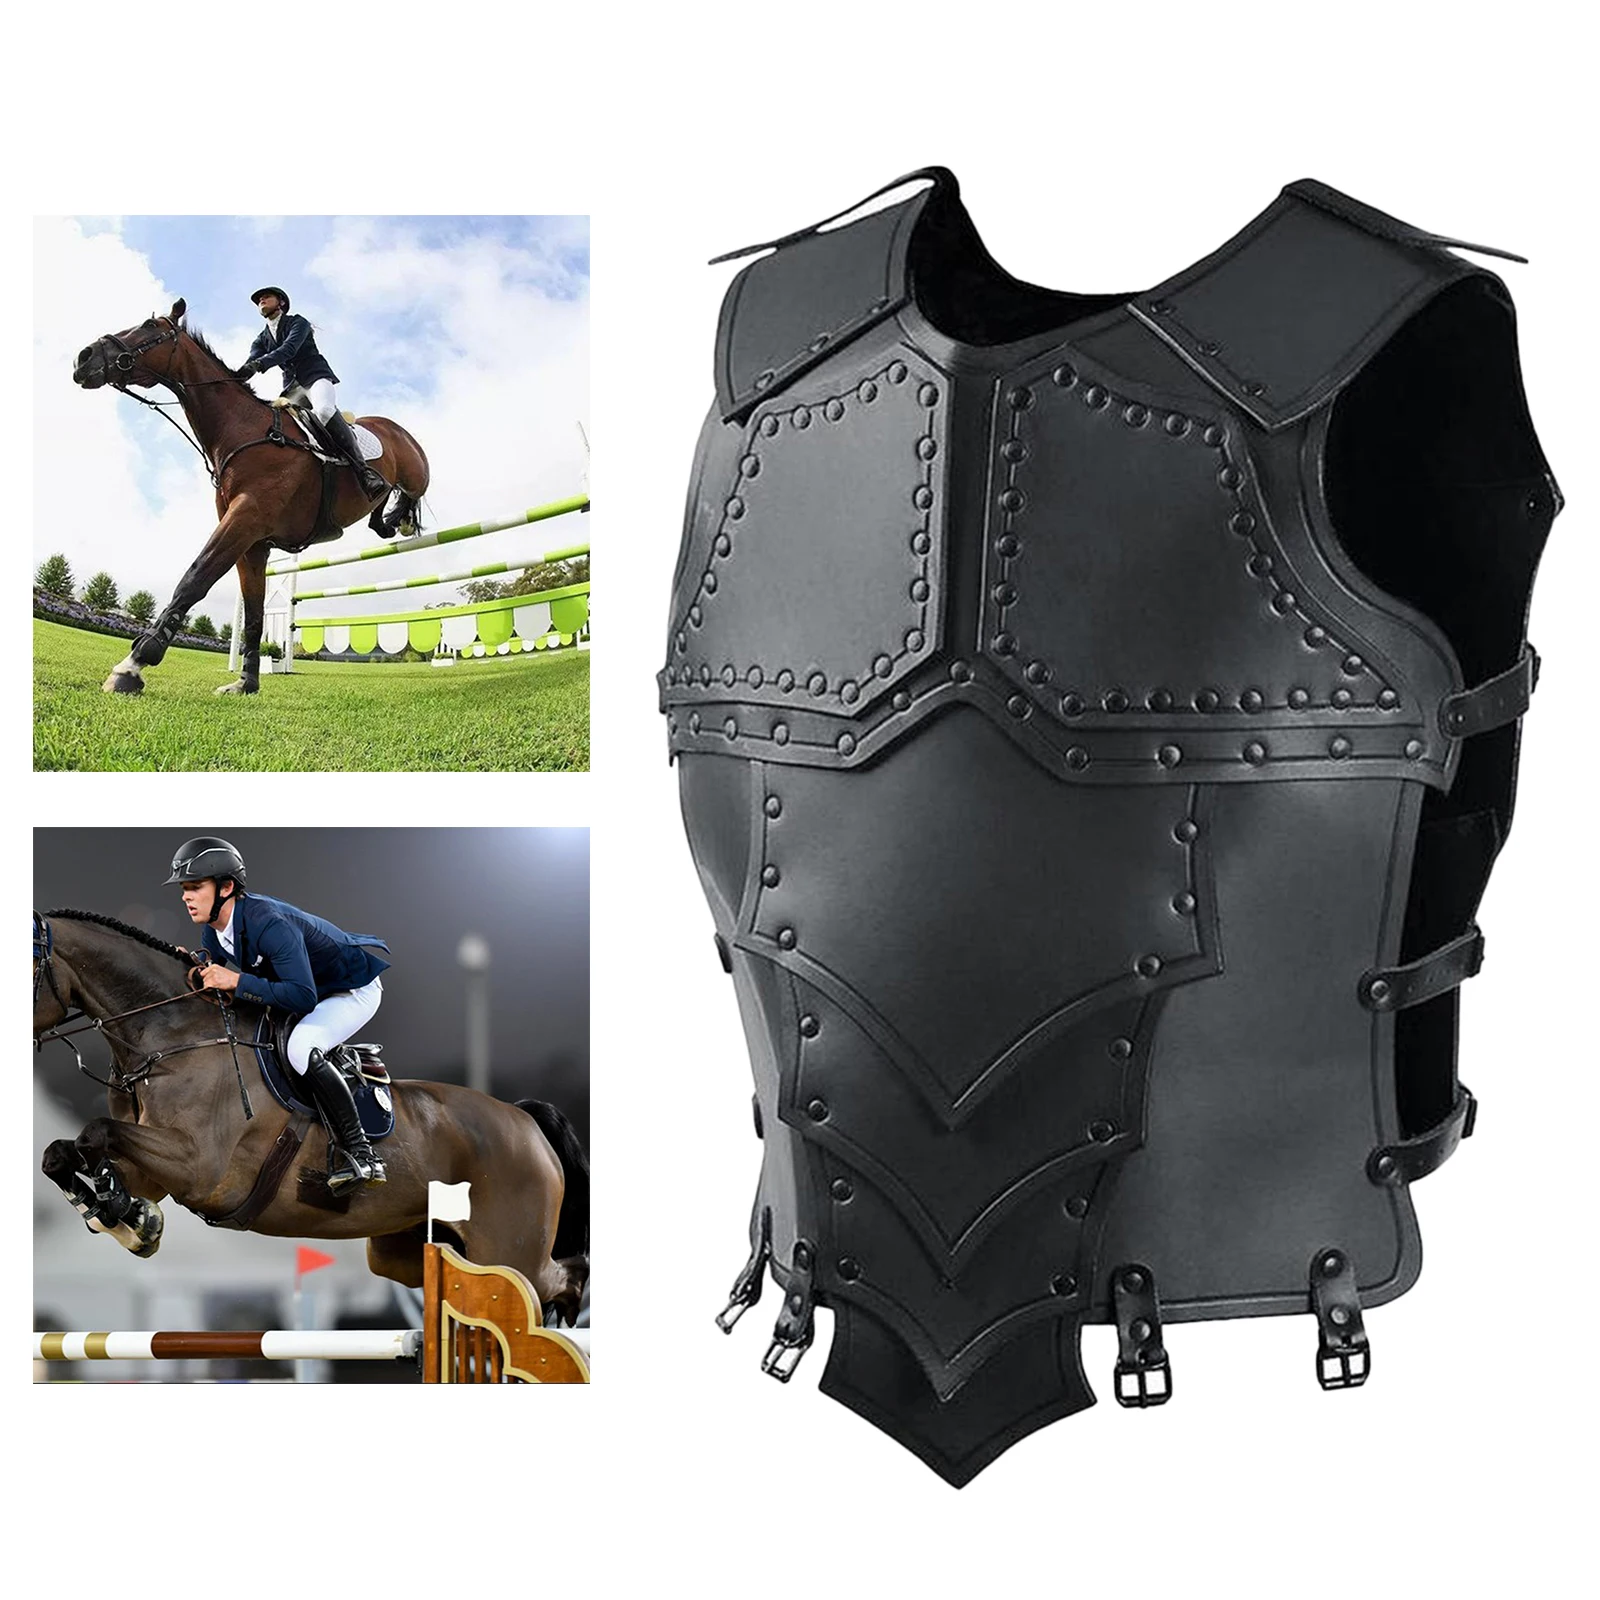 Adult S Black Horse Riding Body Protector Equestrian Eventer Safety Vest 